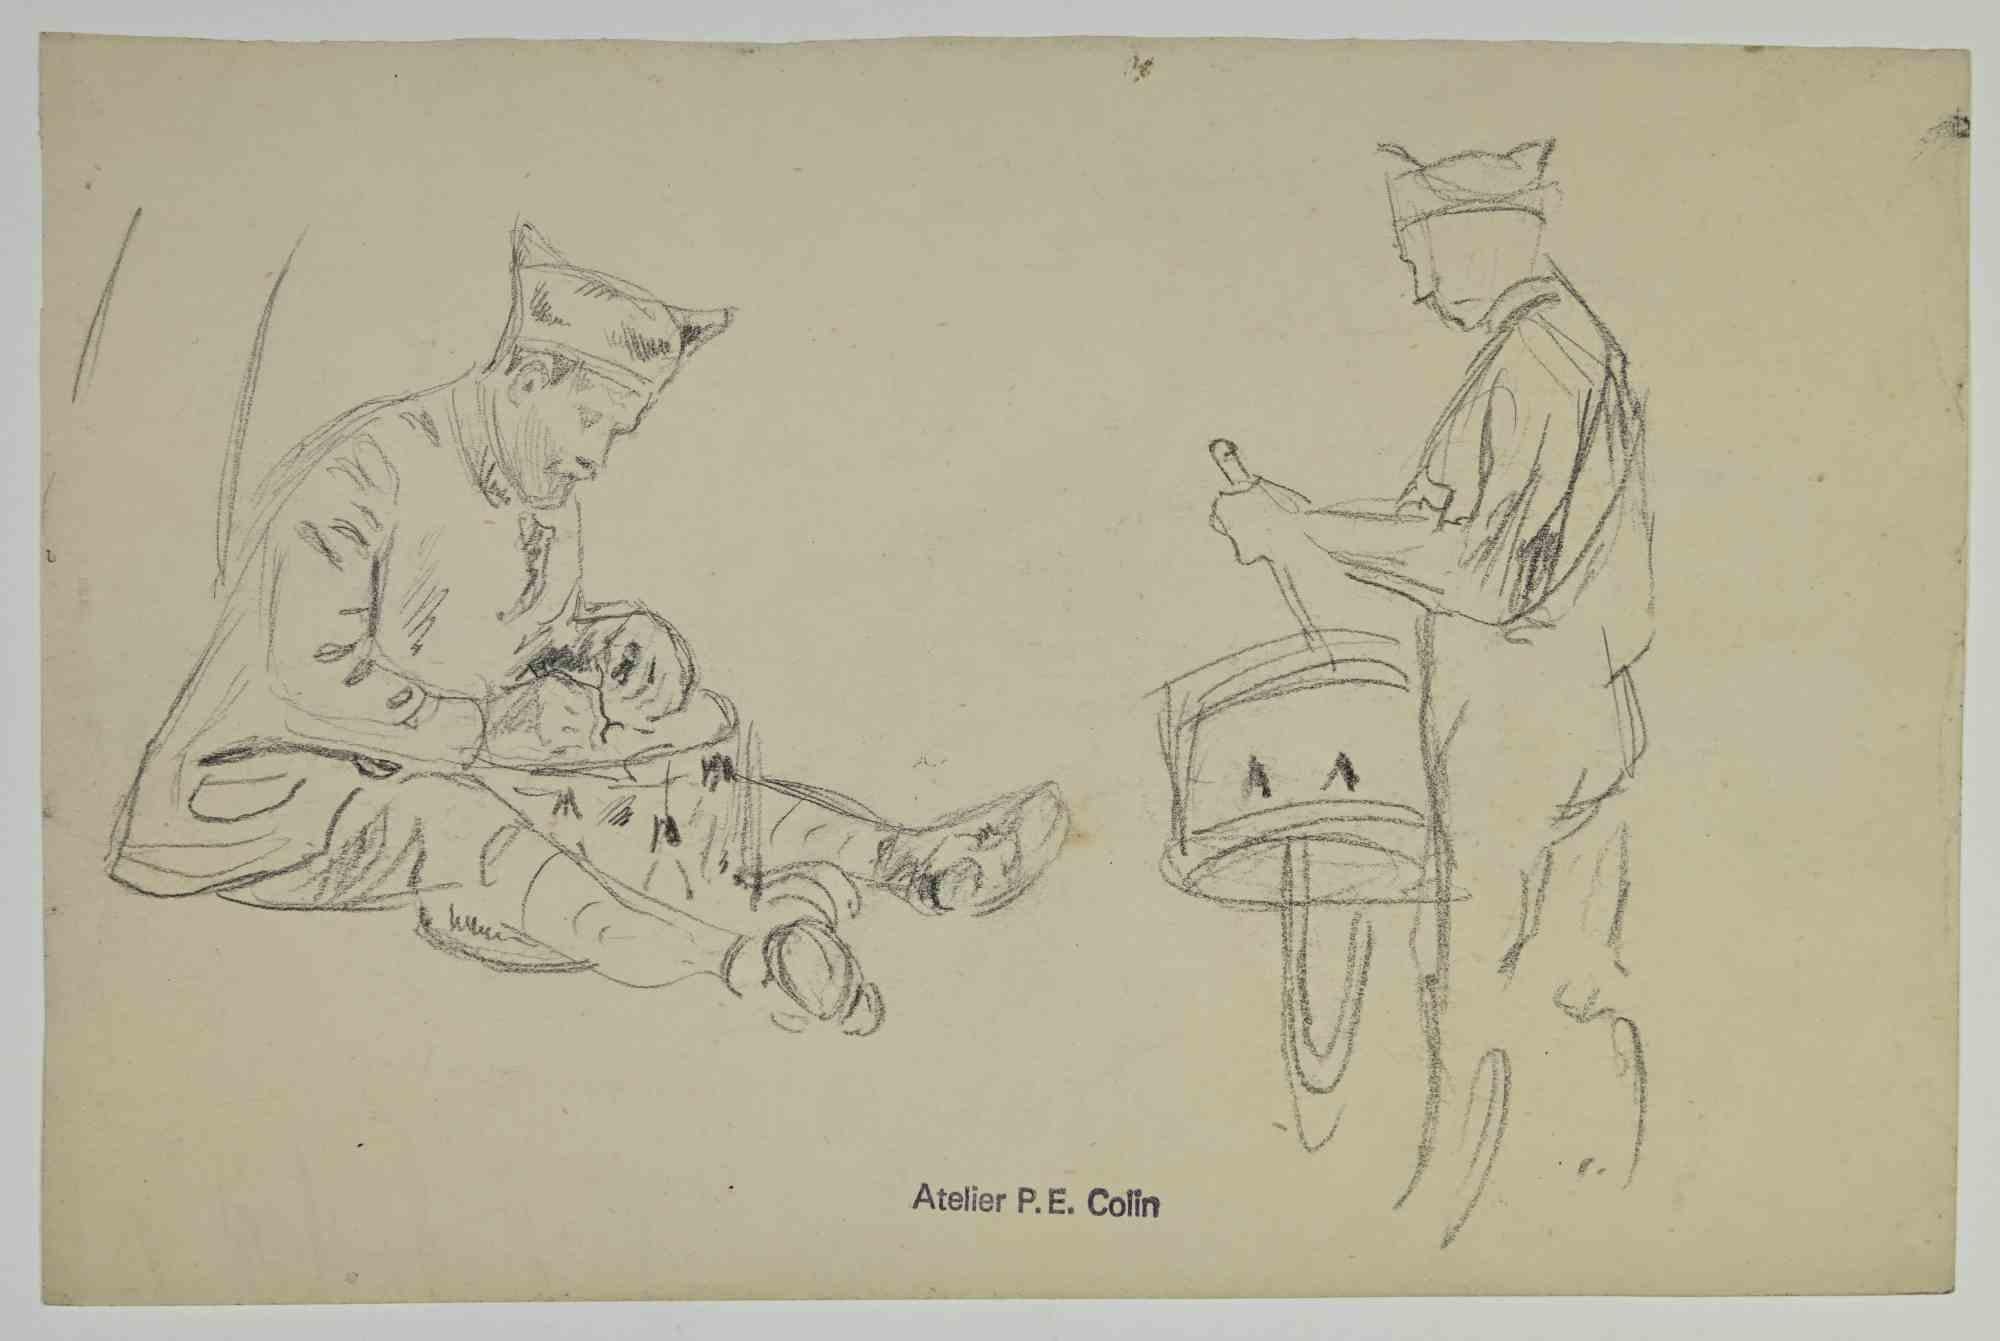 Soldiers is a drawing realized by  Paul Emile Colin in the Early 20th Century.

Pencil on ivory colored paper

Stamped on the lower.

Good conditions with slight foxing.

The artwork is realized through deft expressive strokes.